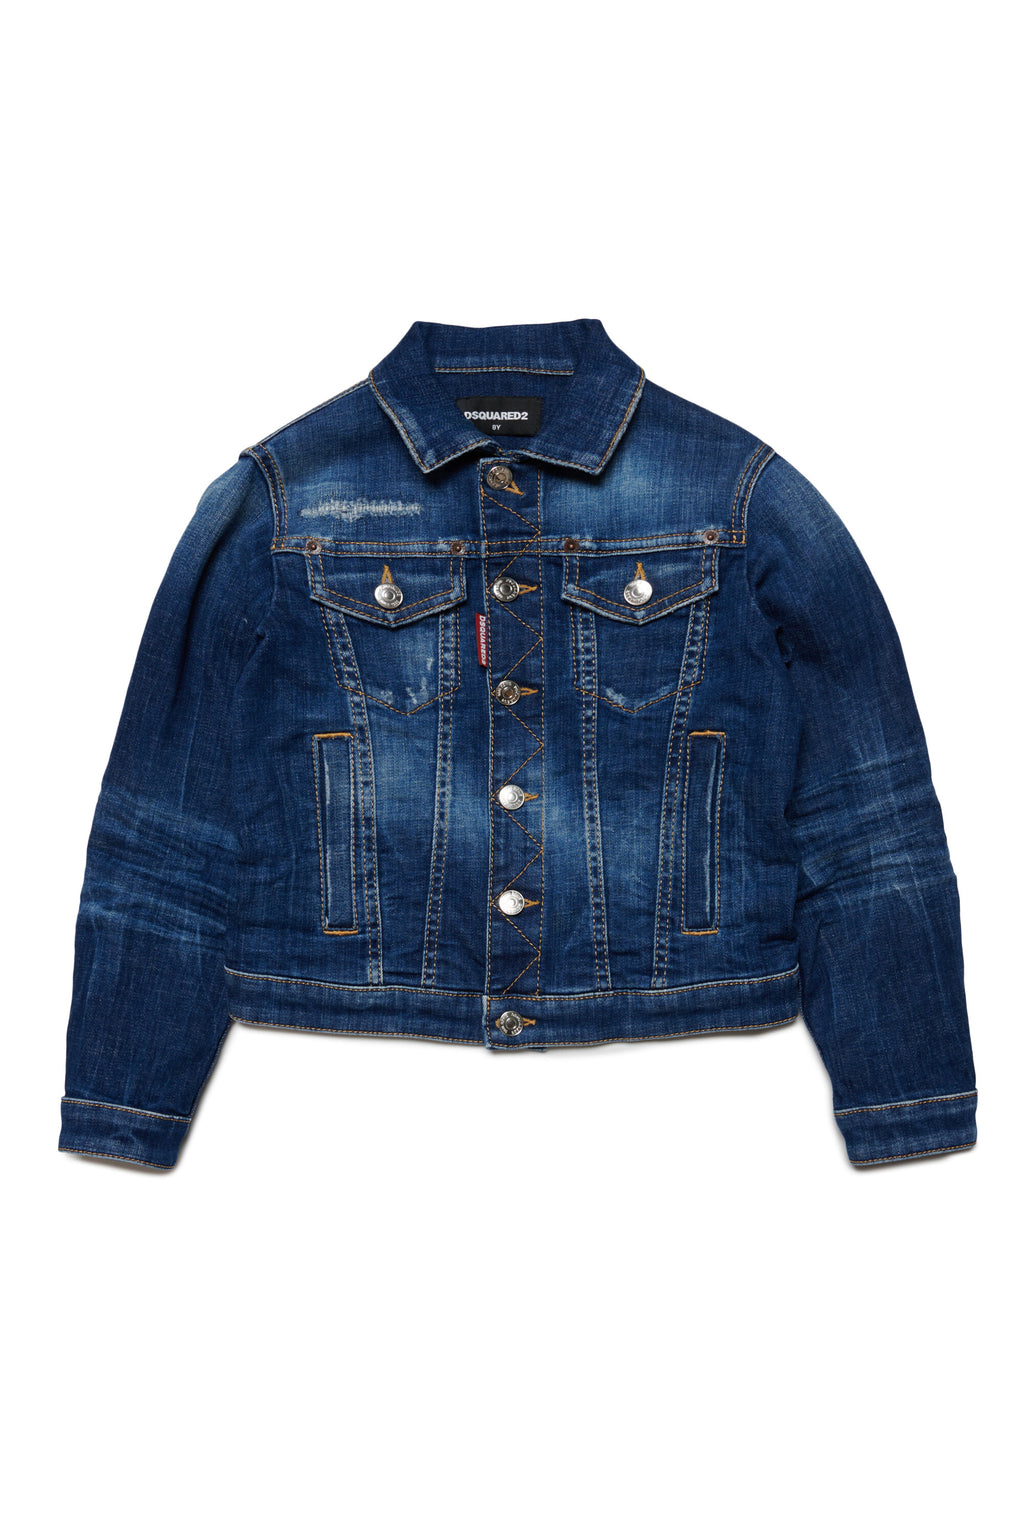 Shaded blue denim jacket with breakouts